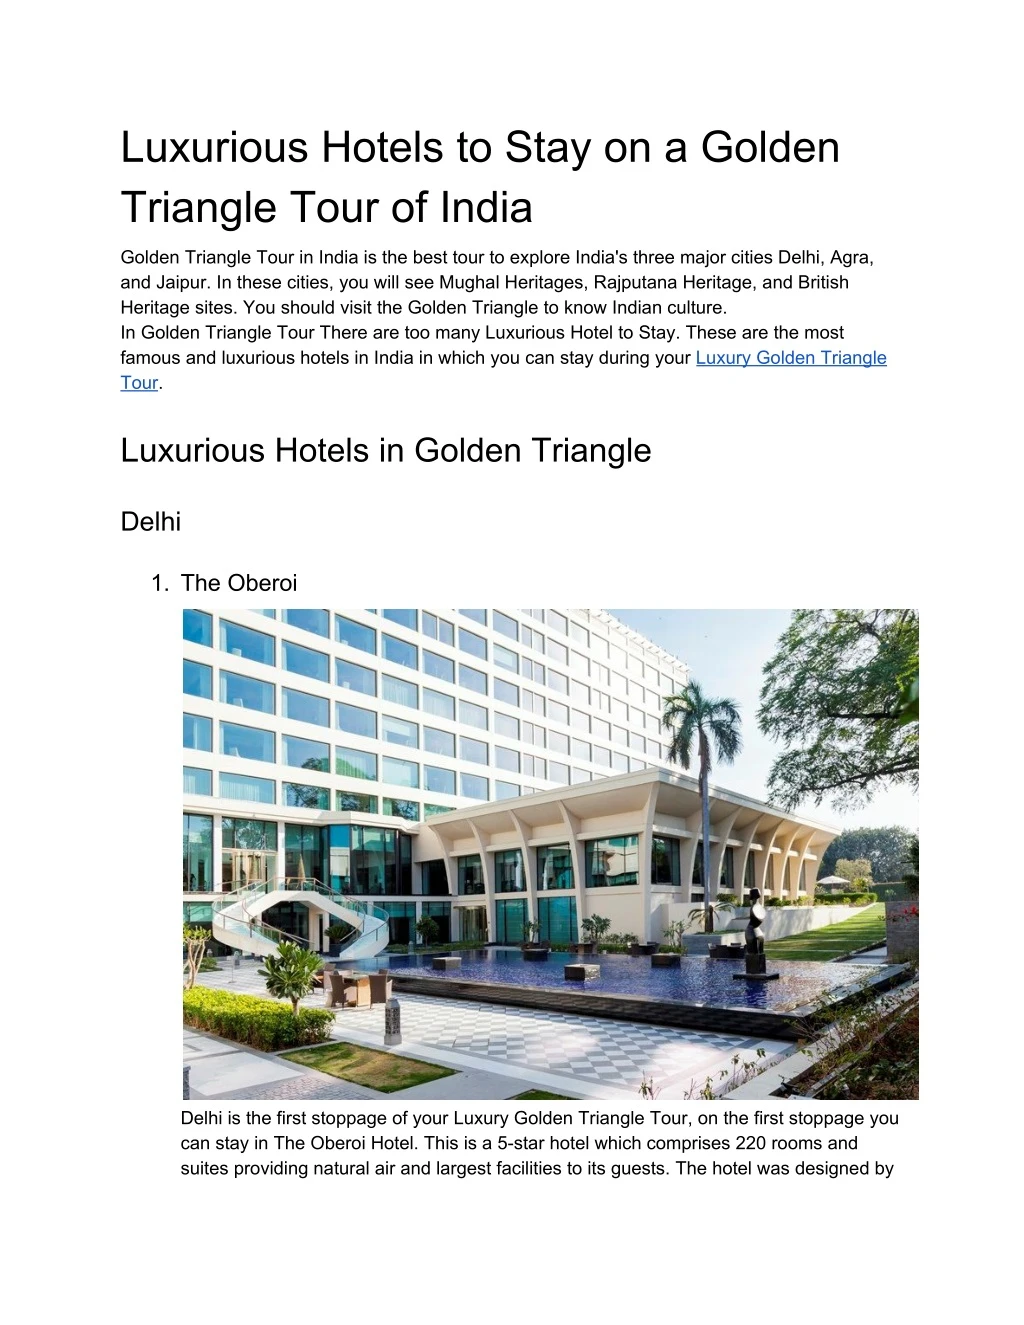 luxurious hotels to stay on a golden triangle